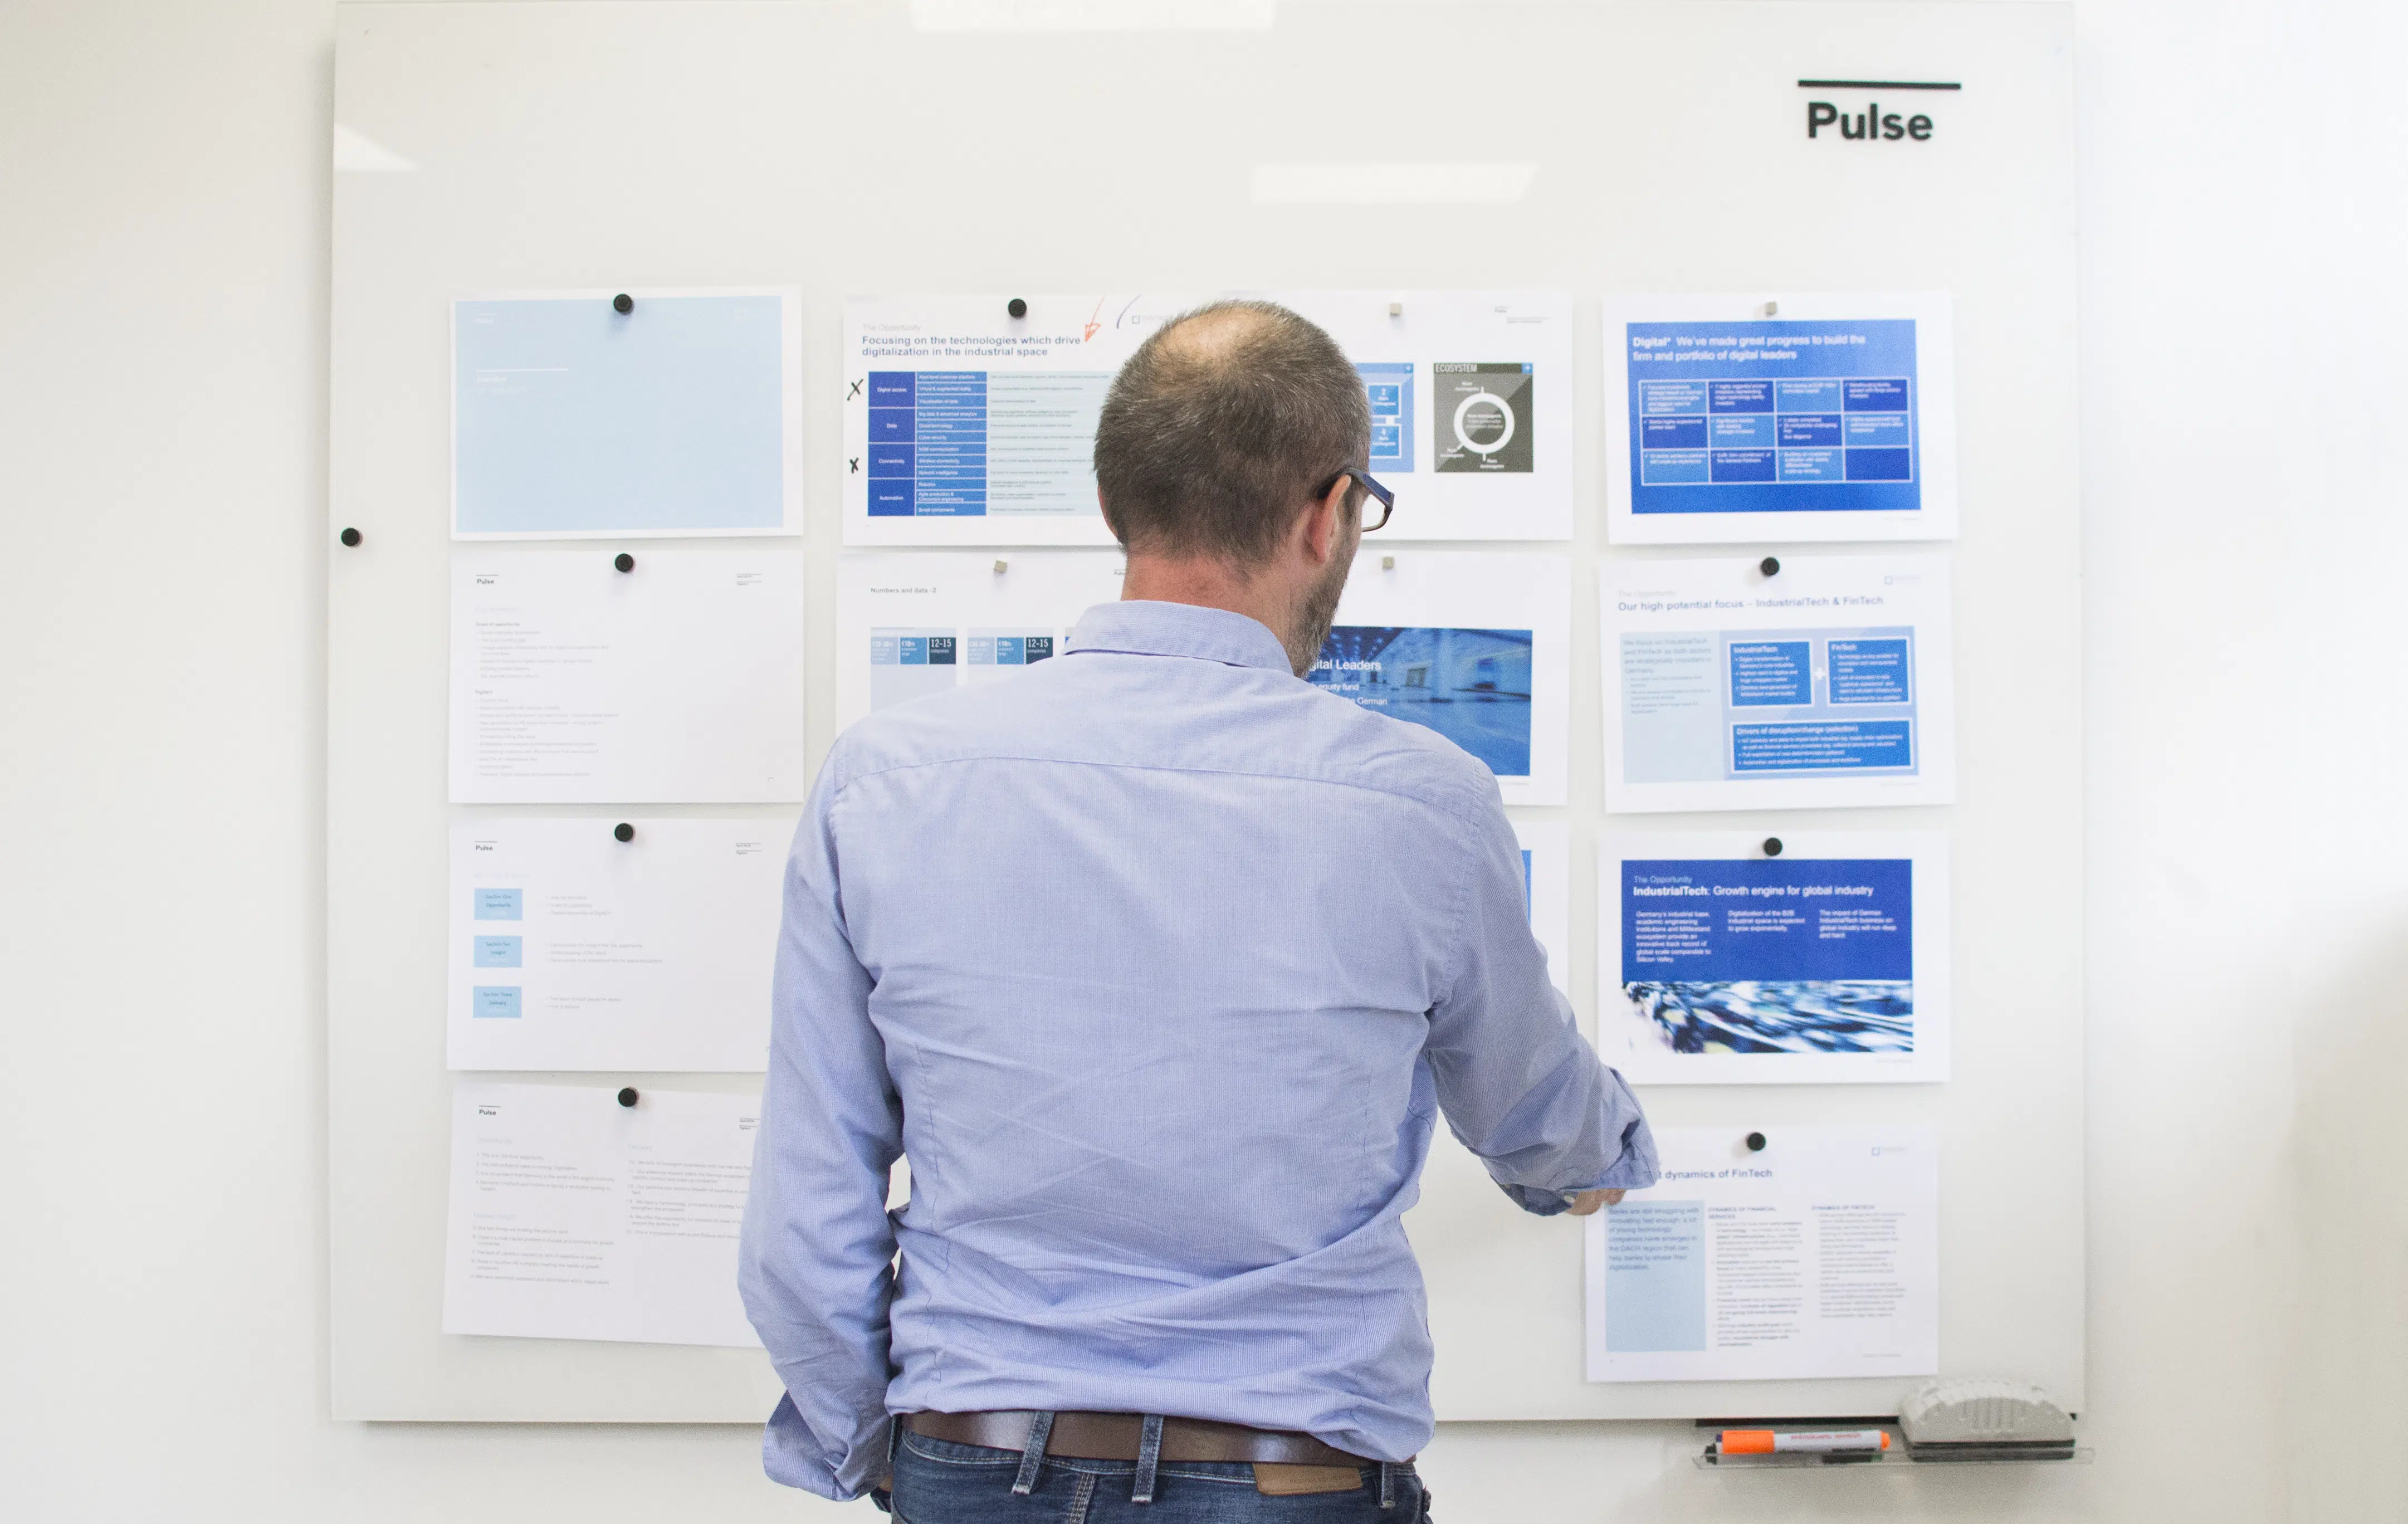 Man with blue shirt looking at white board with blue and white pieces of paper